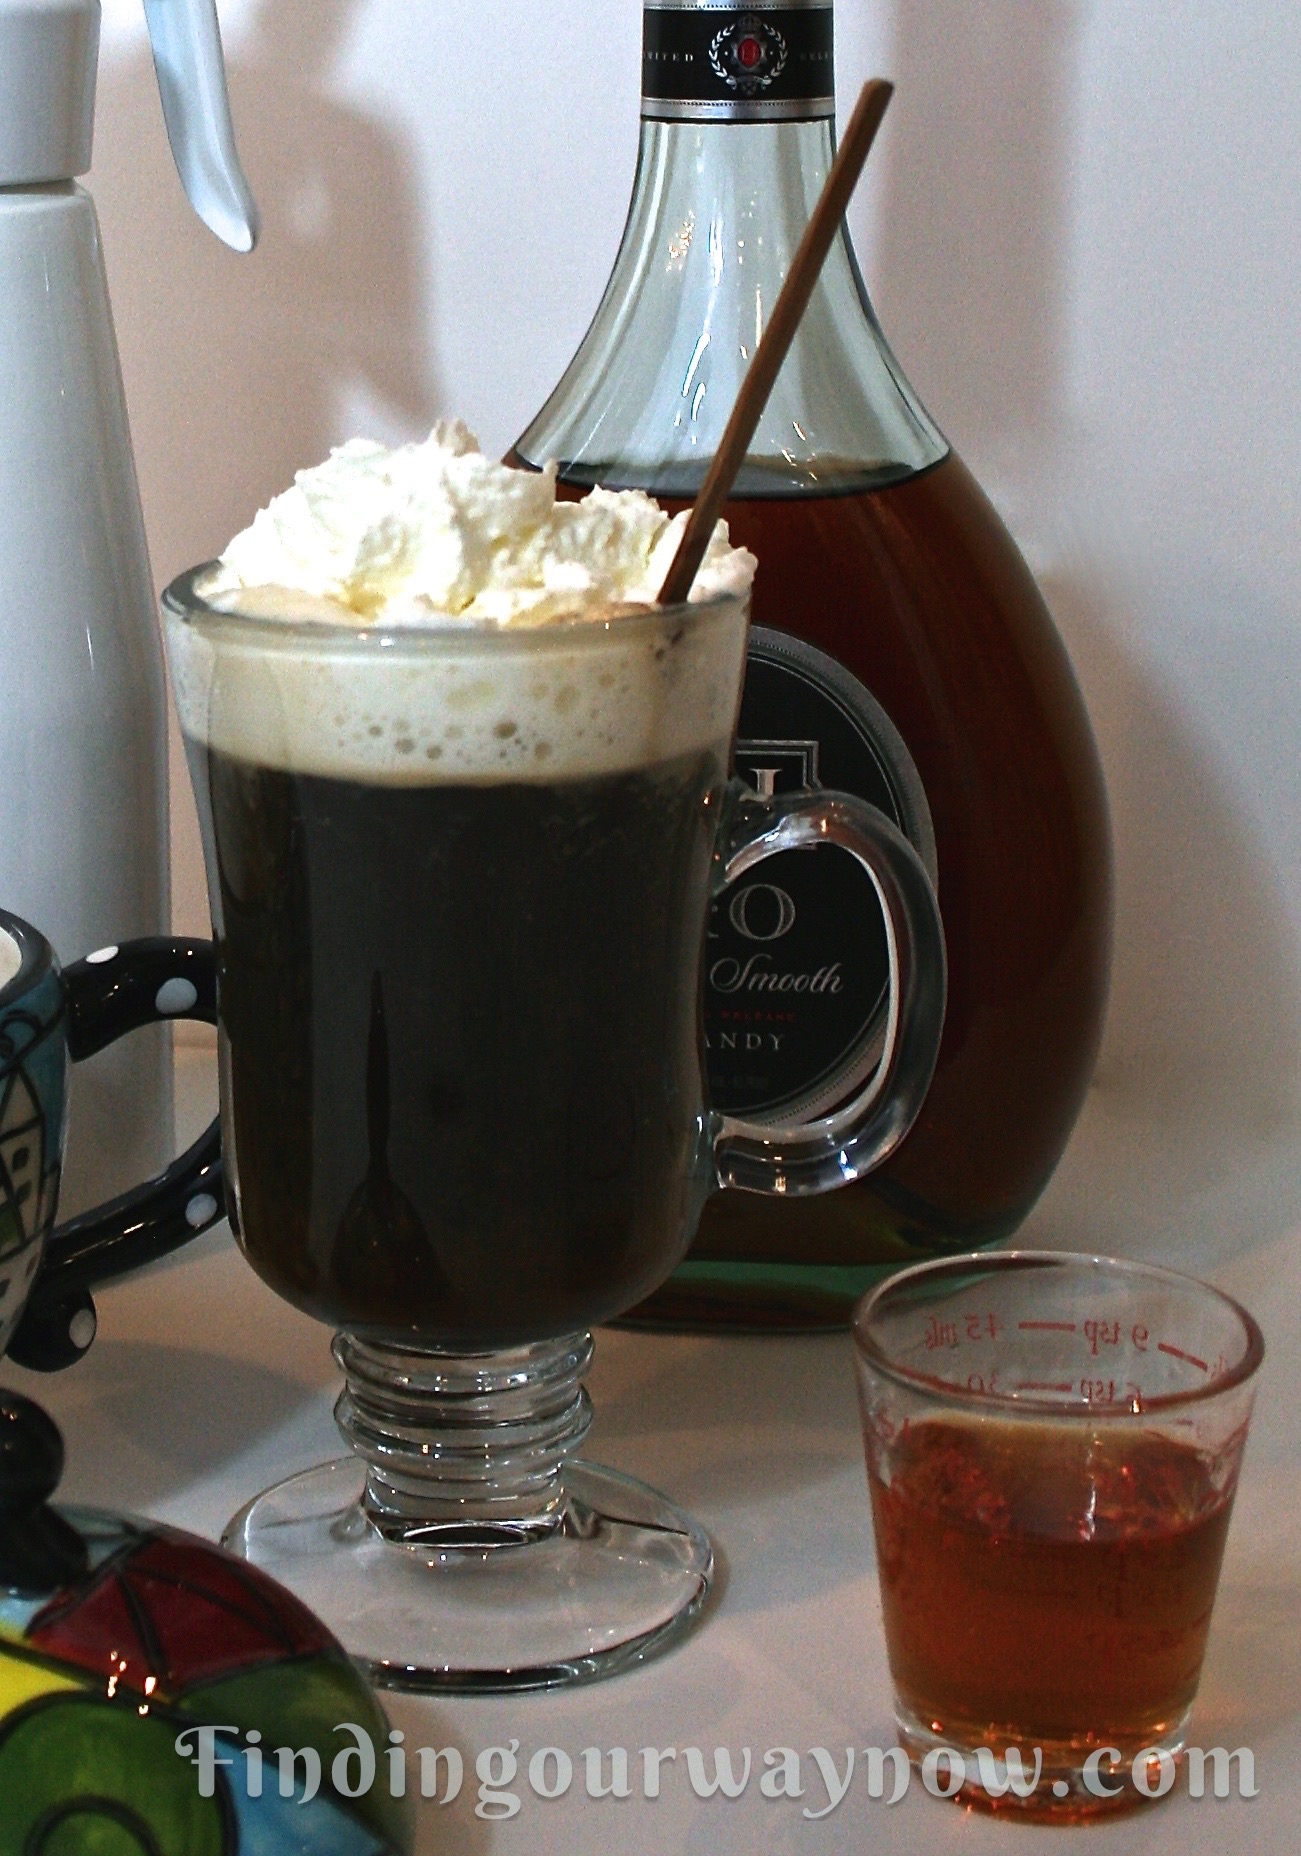 Original Irish Coffee: #Recipe #Cocktail - Finding Our Way Now